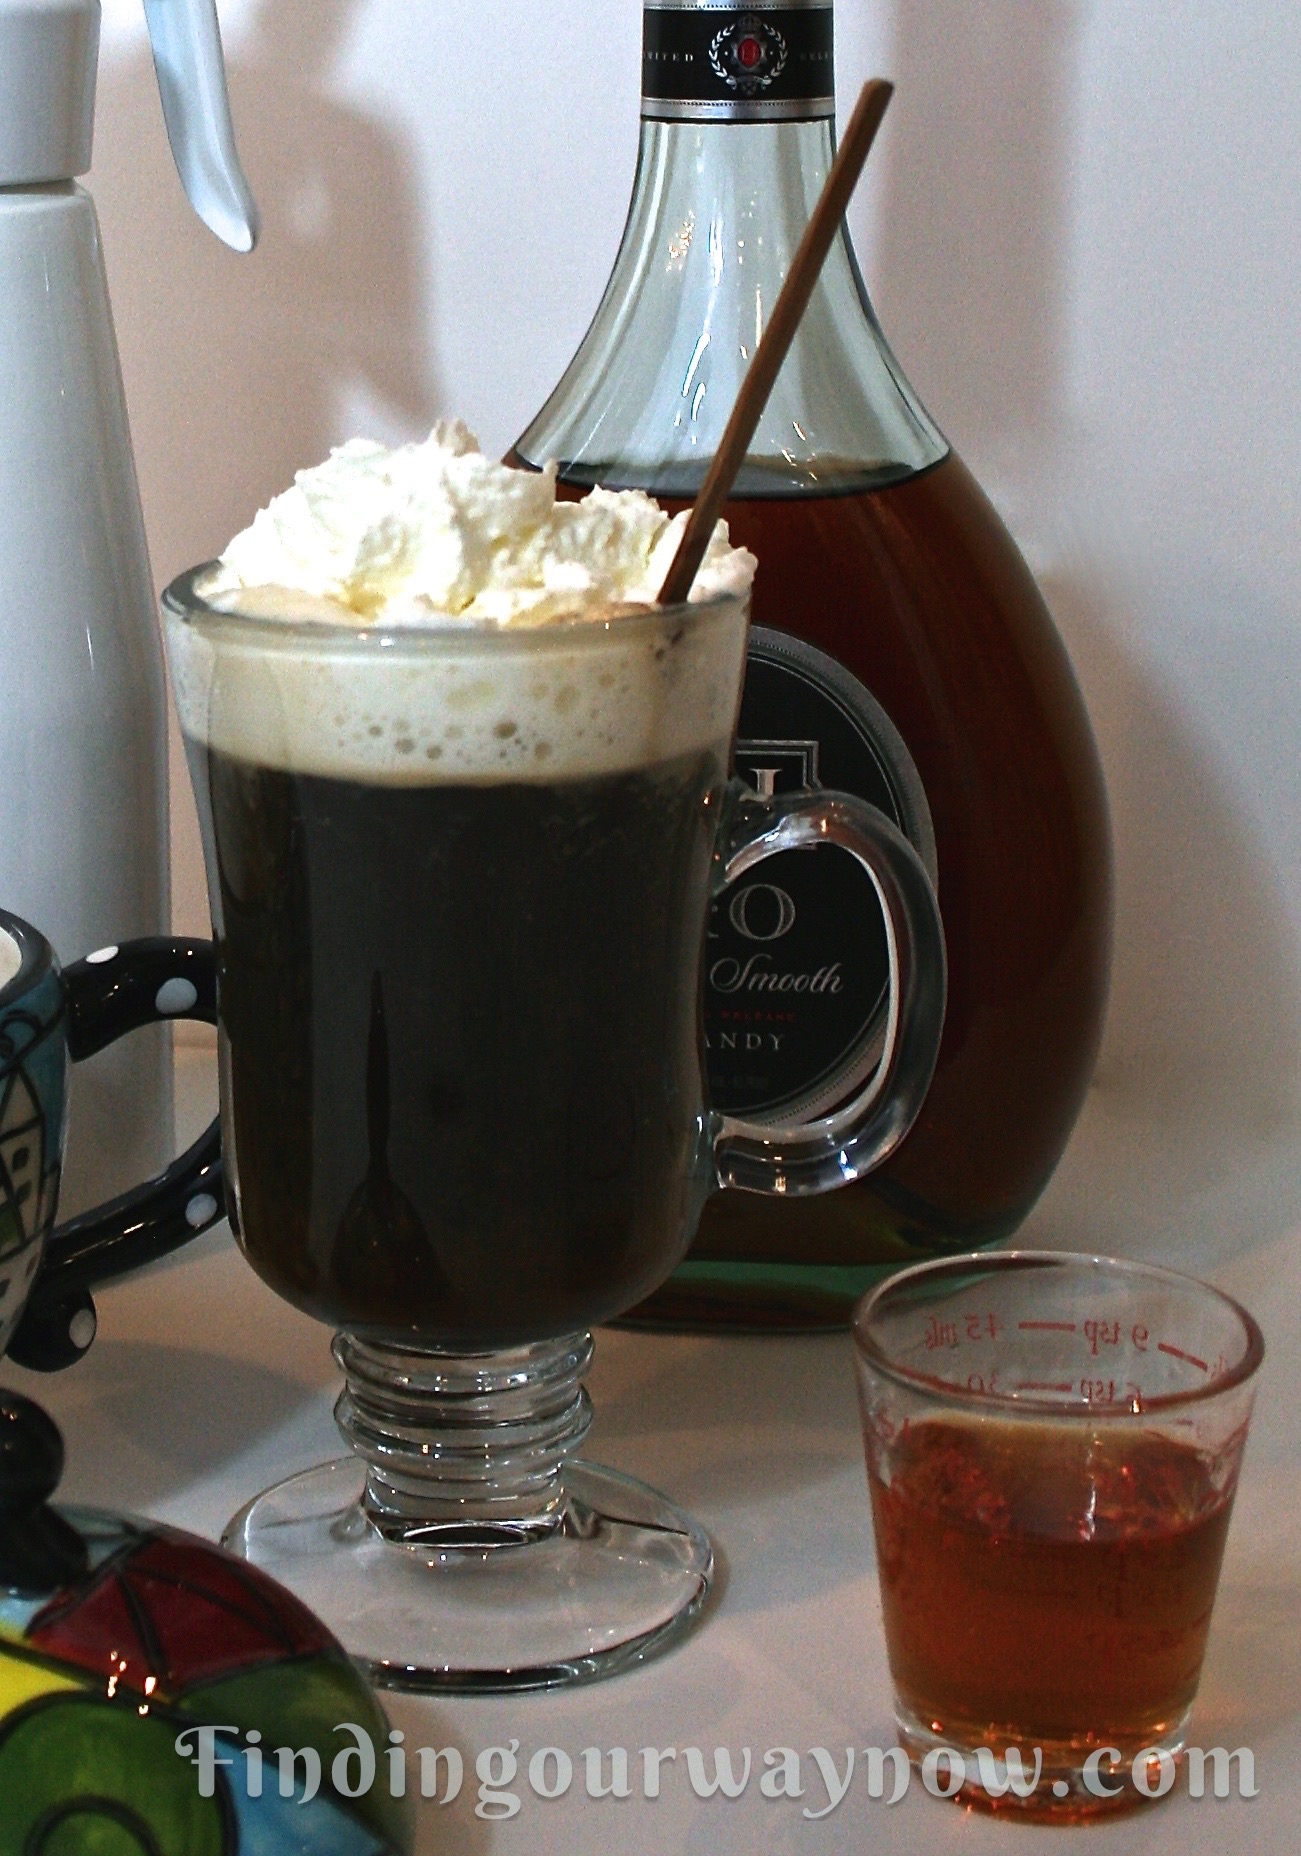 Original Irish Coffee: #Recipe #Cocktail - Finding Our Way Now